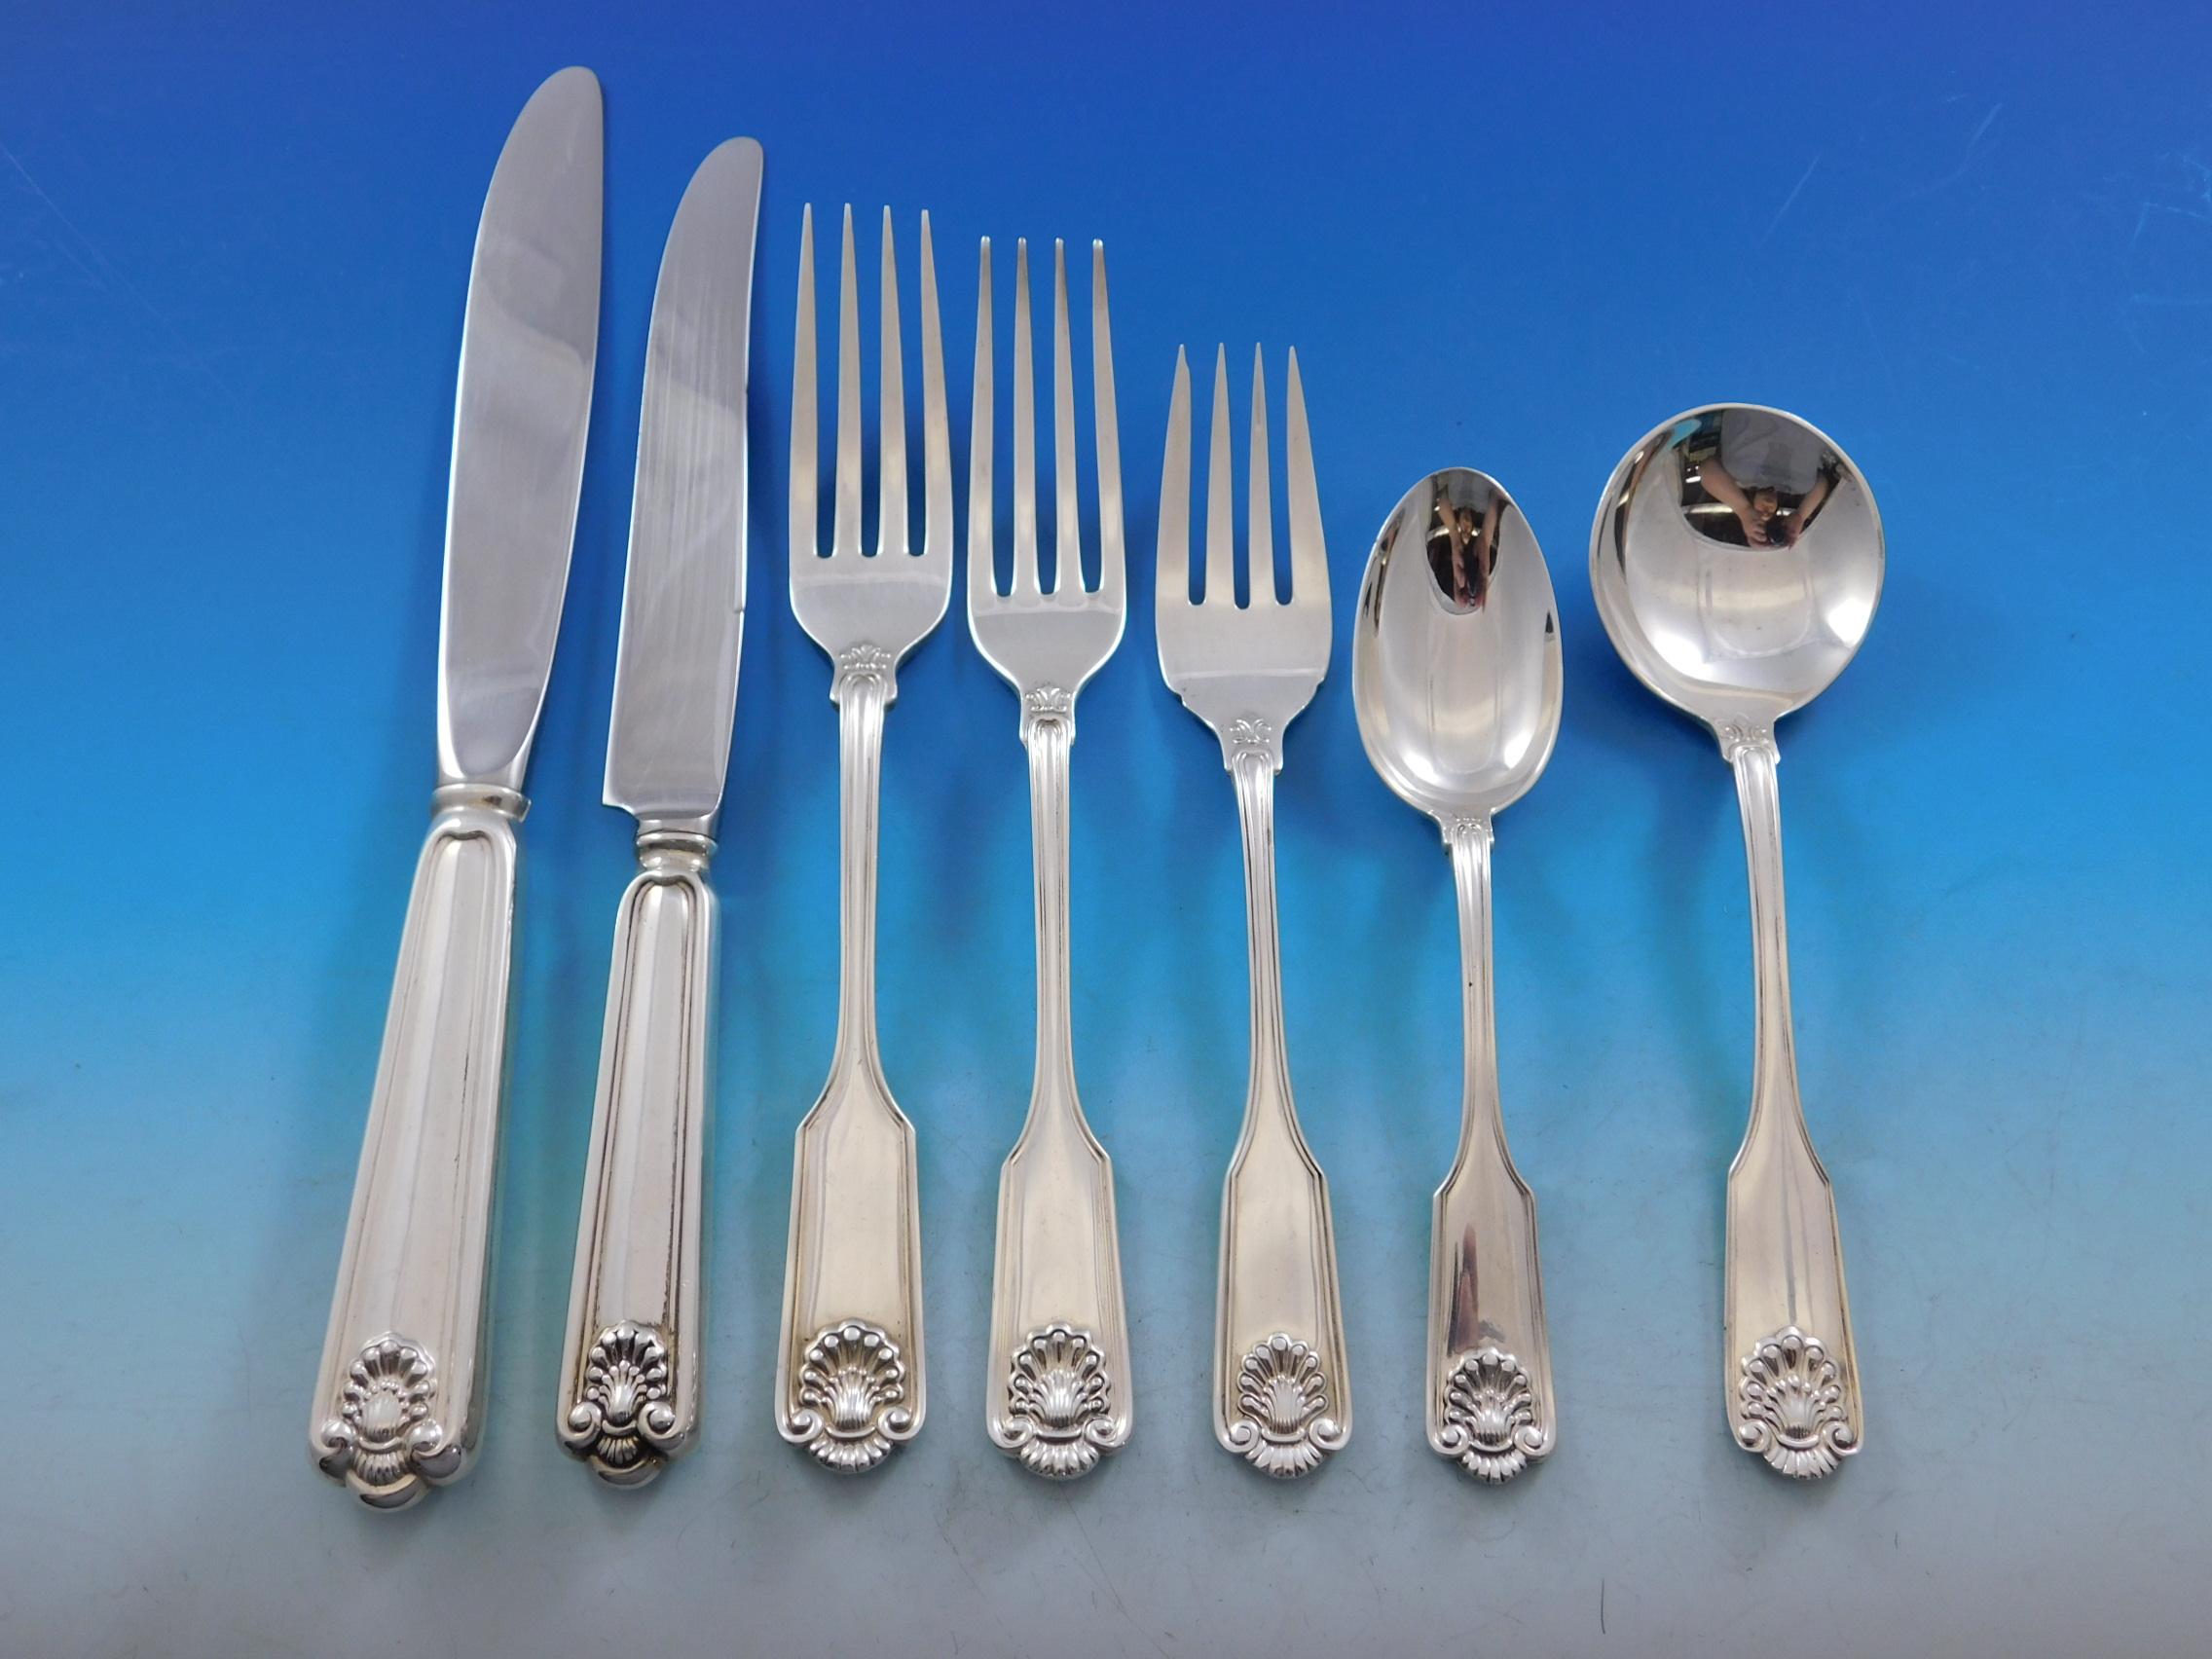 Exquisite Fiddle Shell by Frank Smith sterling silver flatware set, 84 pieces. This popular Classic pattern was first offered in 1914 and was discontinued in 2003. This set includes:

12 dinner size knives, modern blades, 9 3/8